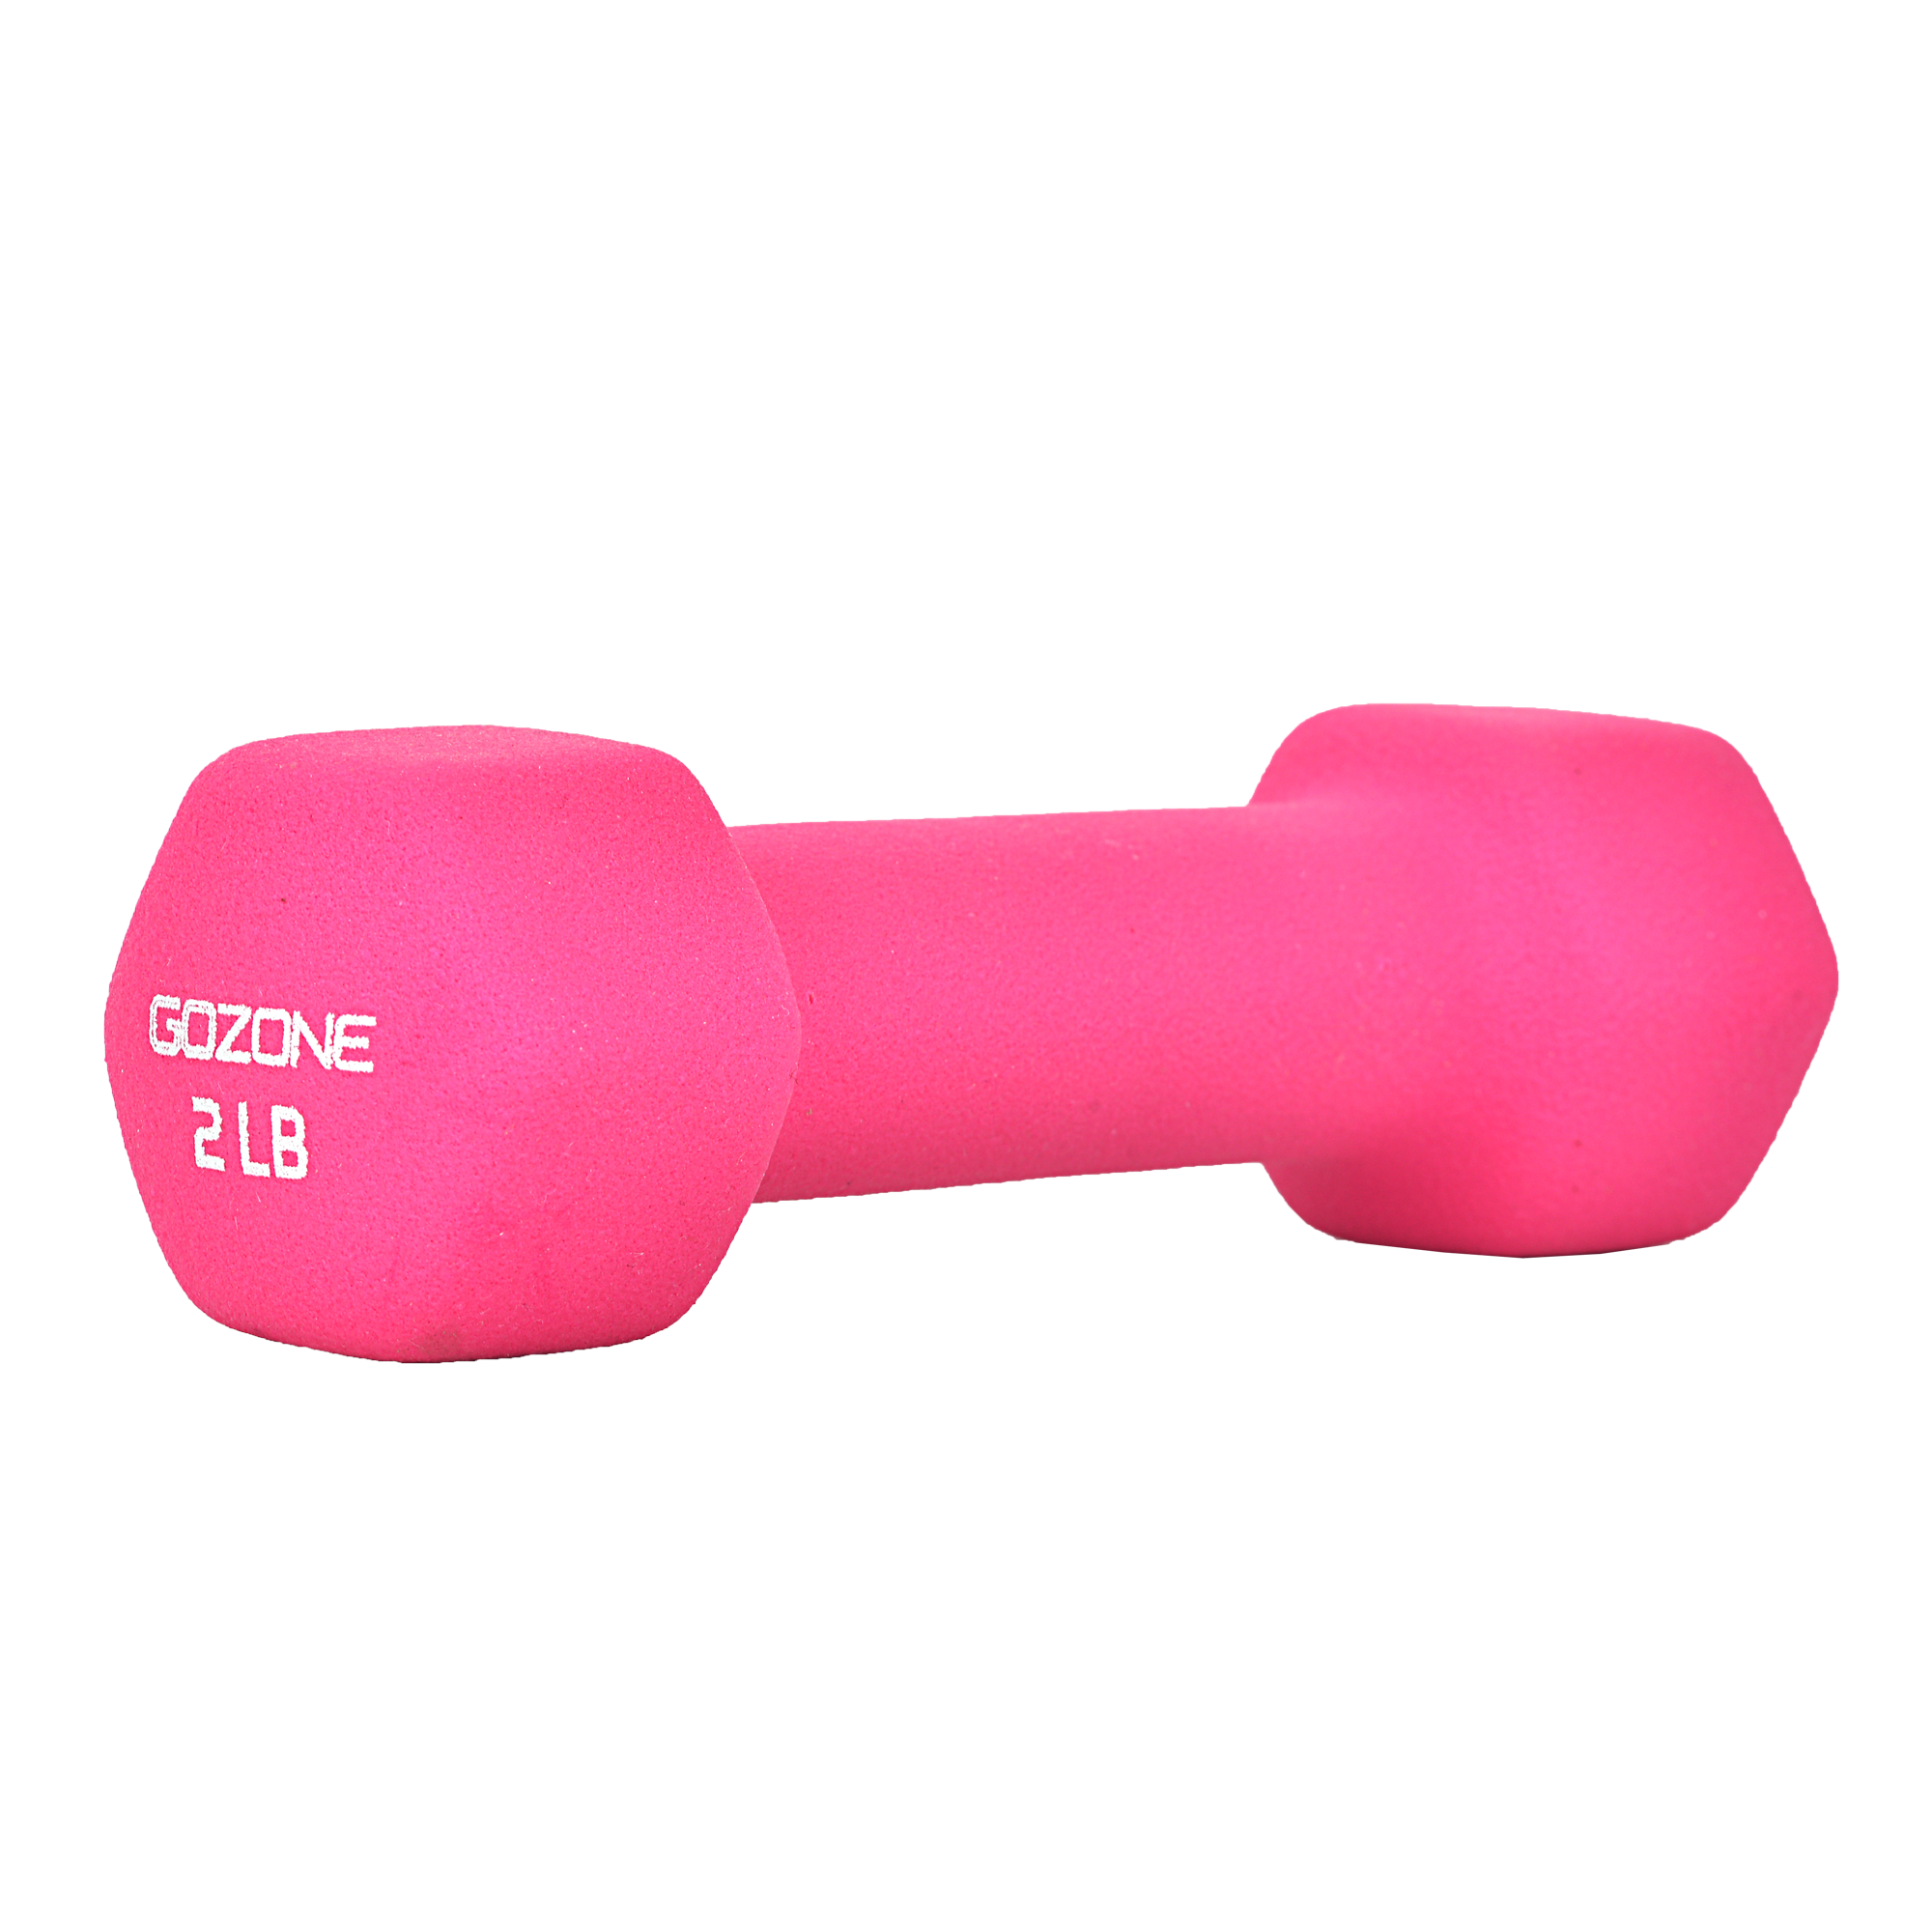 Dumbbell Fitness Pink Iron Weight In Duotone Style On Blue